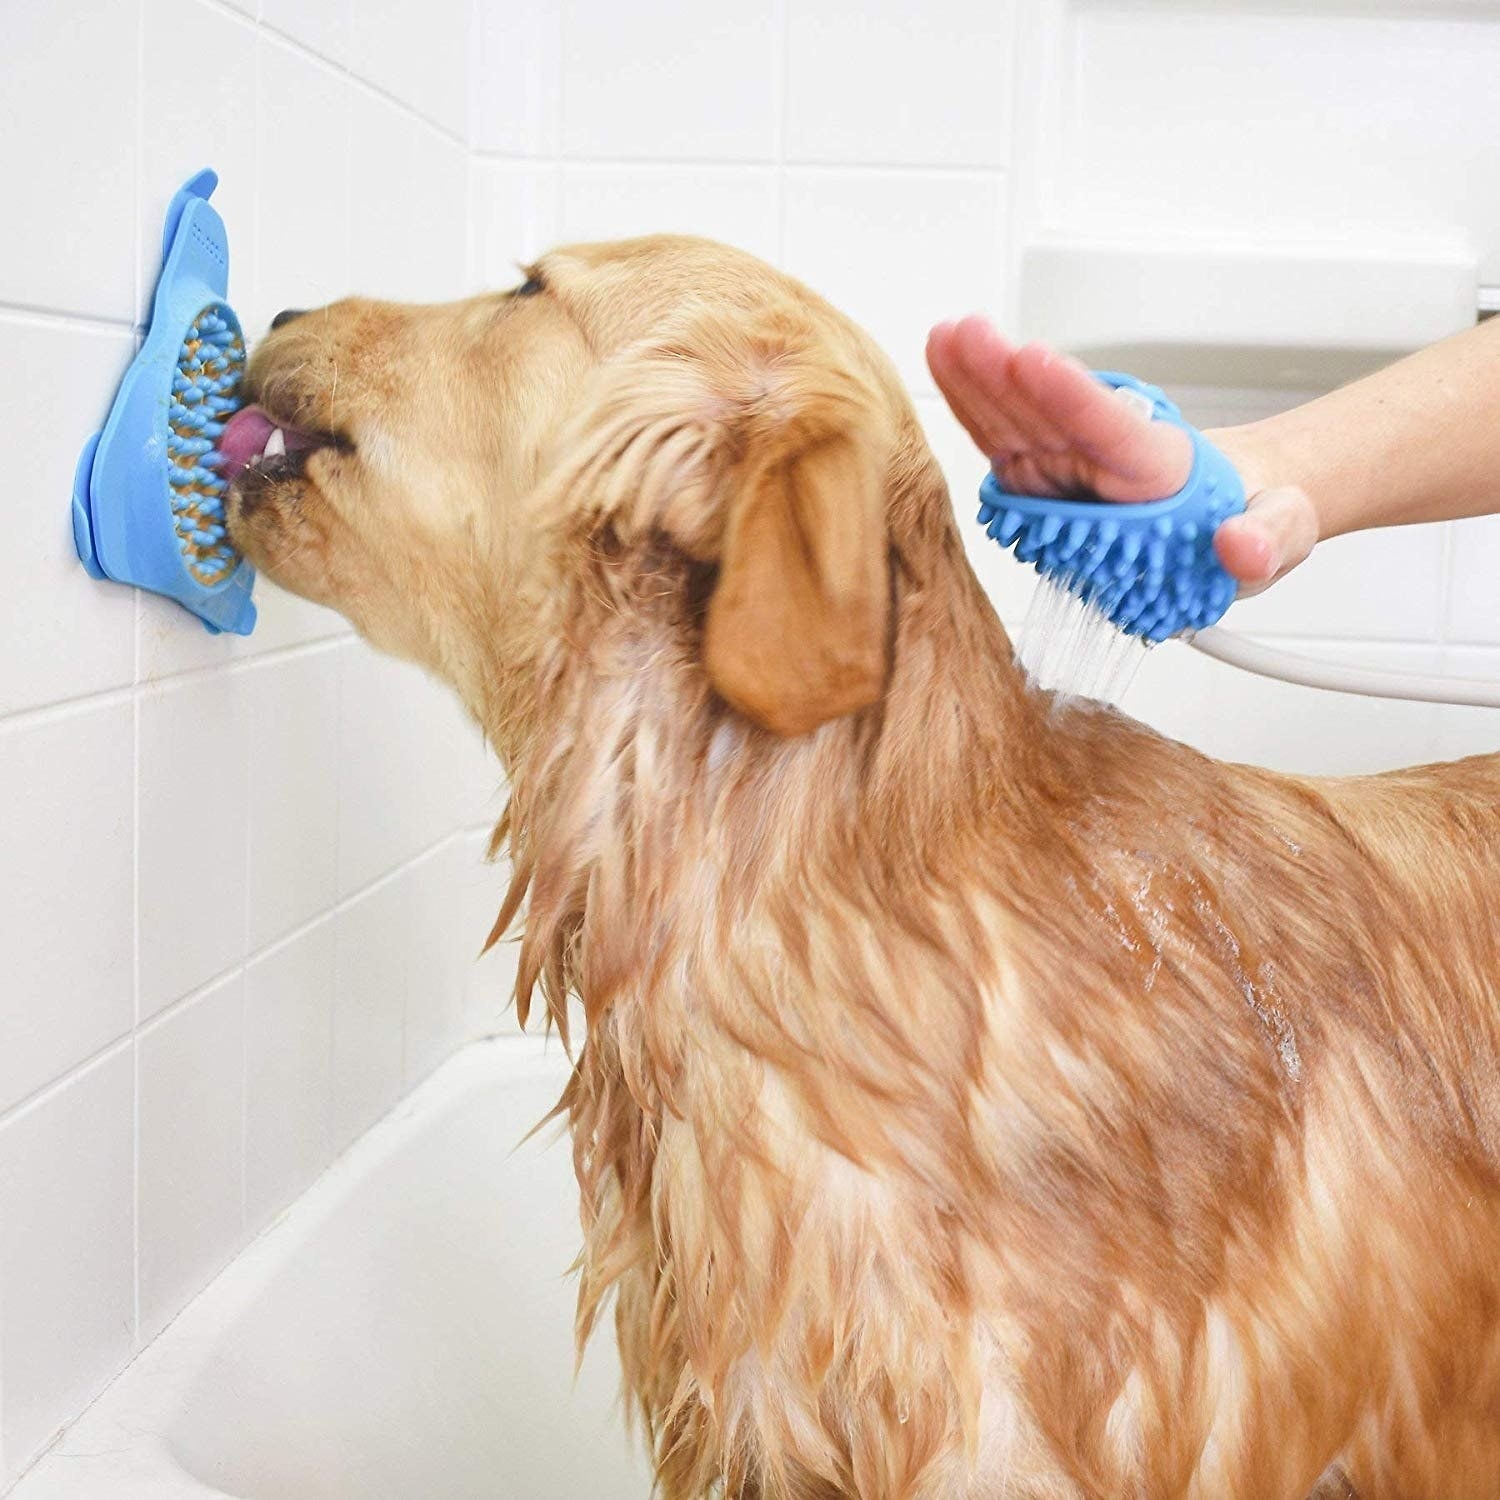 A Golden Retriever licking the small, triangular, blue silicone mat mounted on a tile wall above the tub while he gets a bath